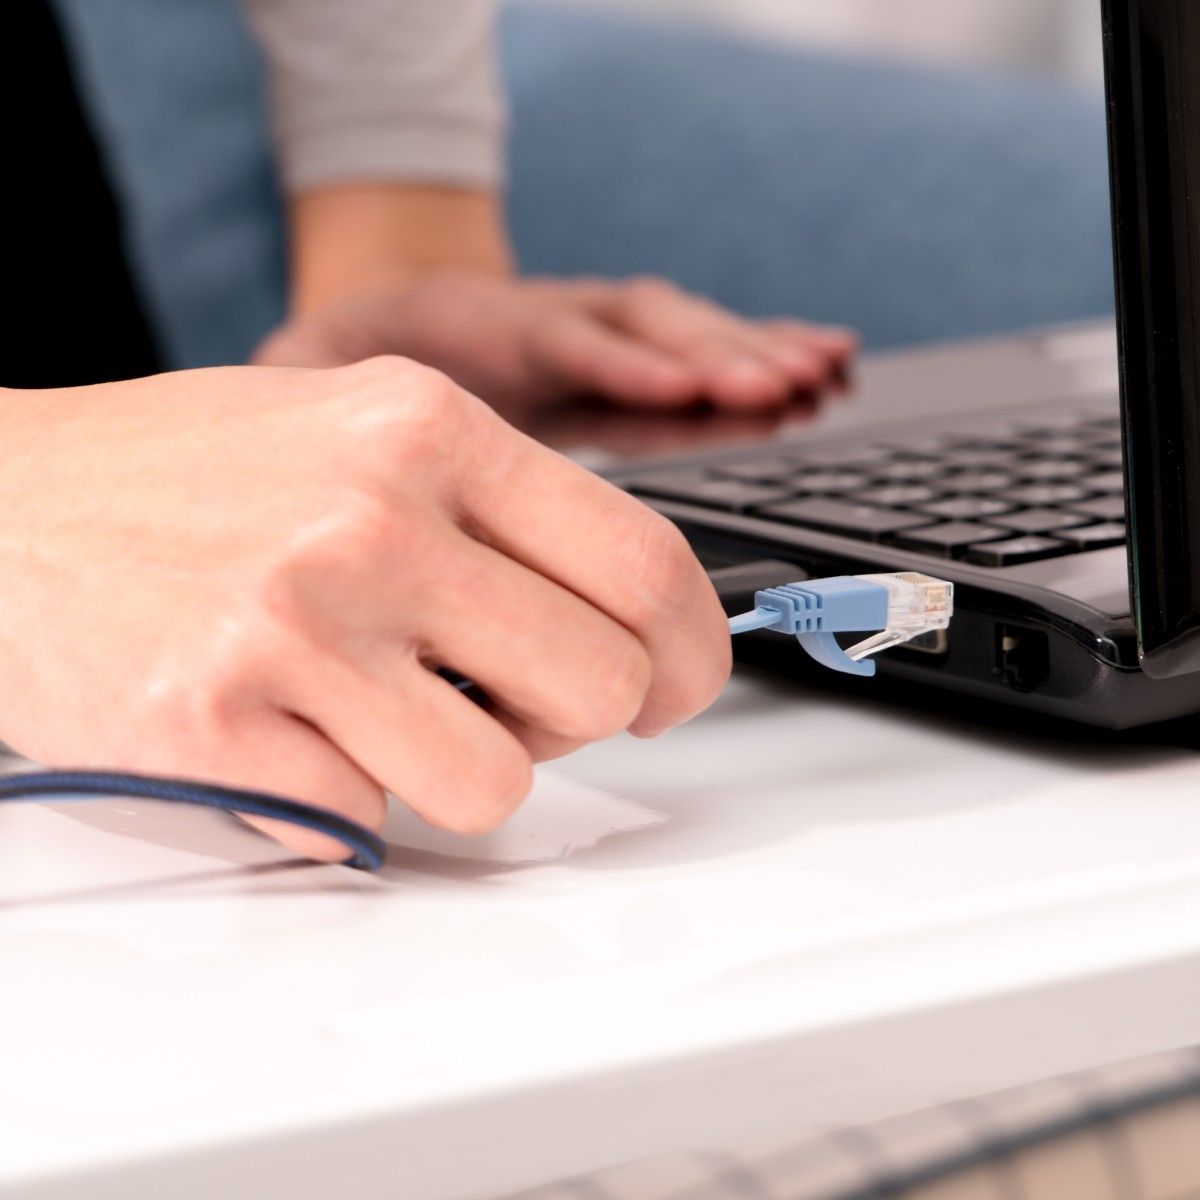 A close-up of a white woman&#x27;s right hand plugging a blue Ethernet cable into the side of her black laptop.